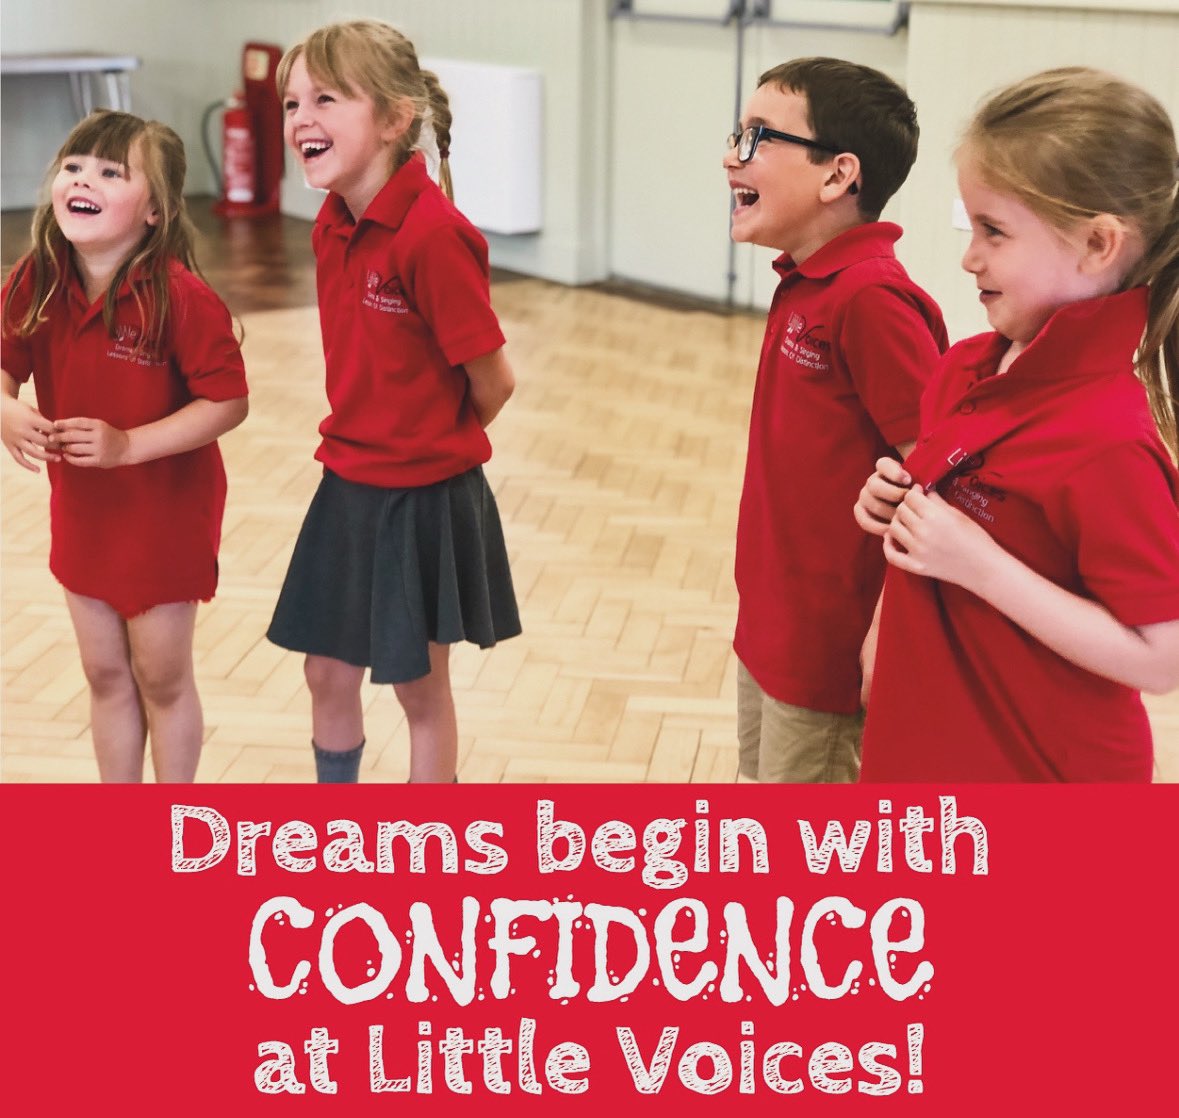 Is your child lacking in confidence? Do you know a young person who would rather text than have an in-person conversation? Social skills are incredibly important & at LV we use fun, performing arts classes to build confidence & teach valuable life skills. Come & join us!🎶🎭